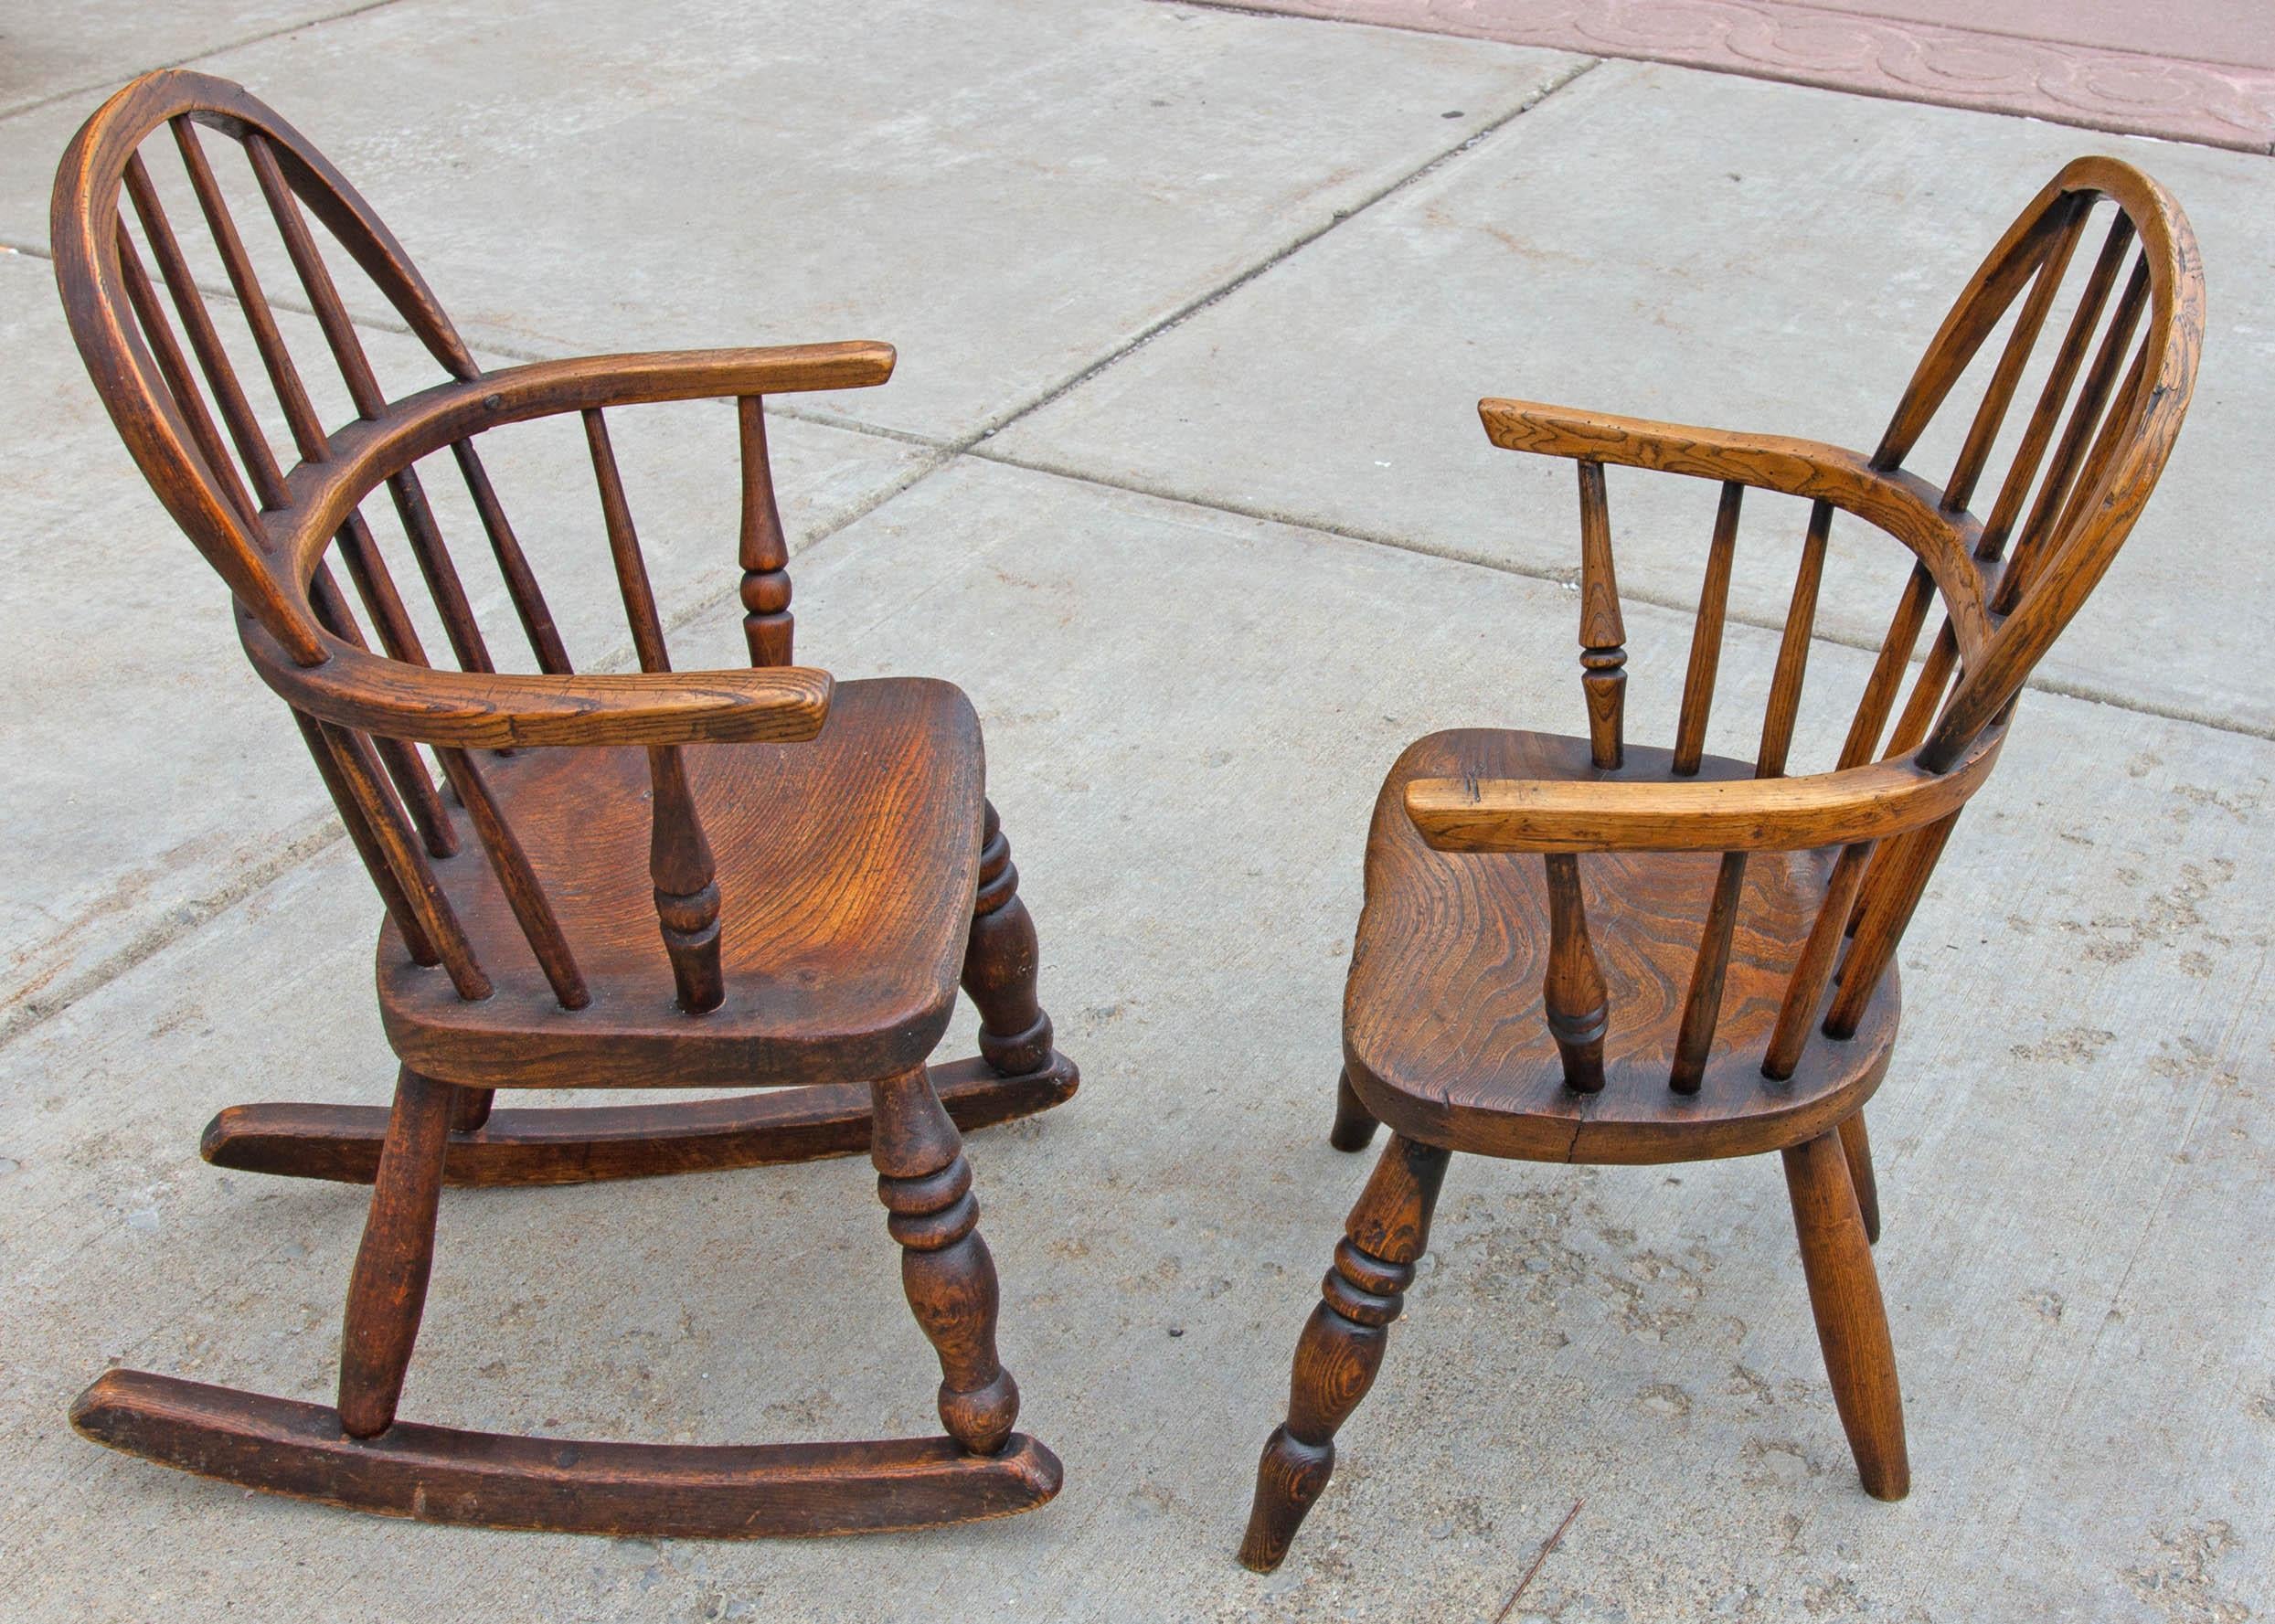 Antique Provincial English elm Windsor chairs. Child size, 18th century. US shipping $200.